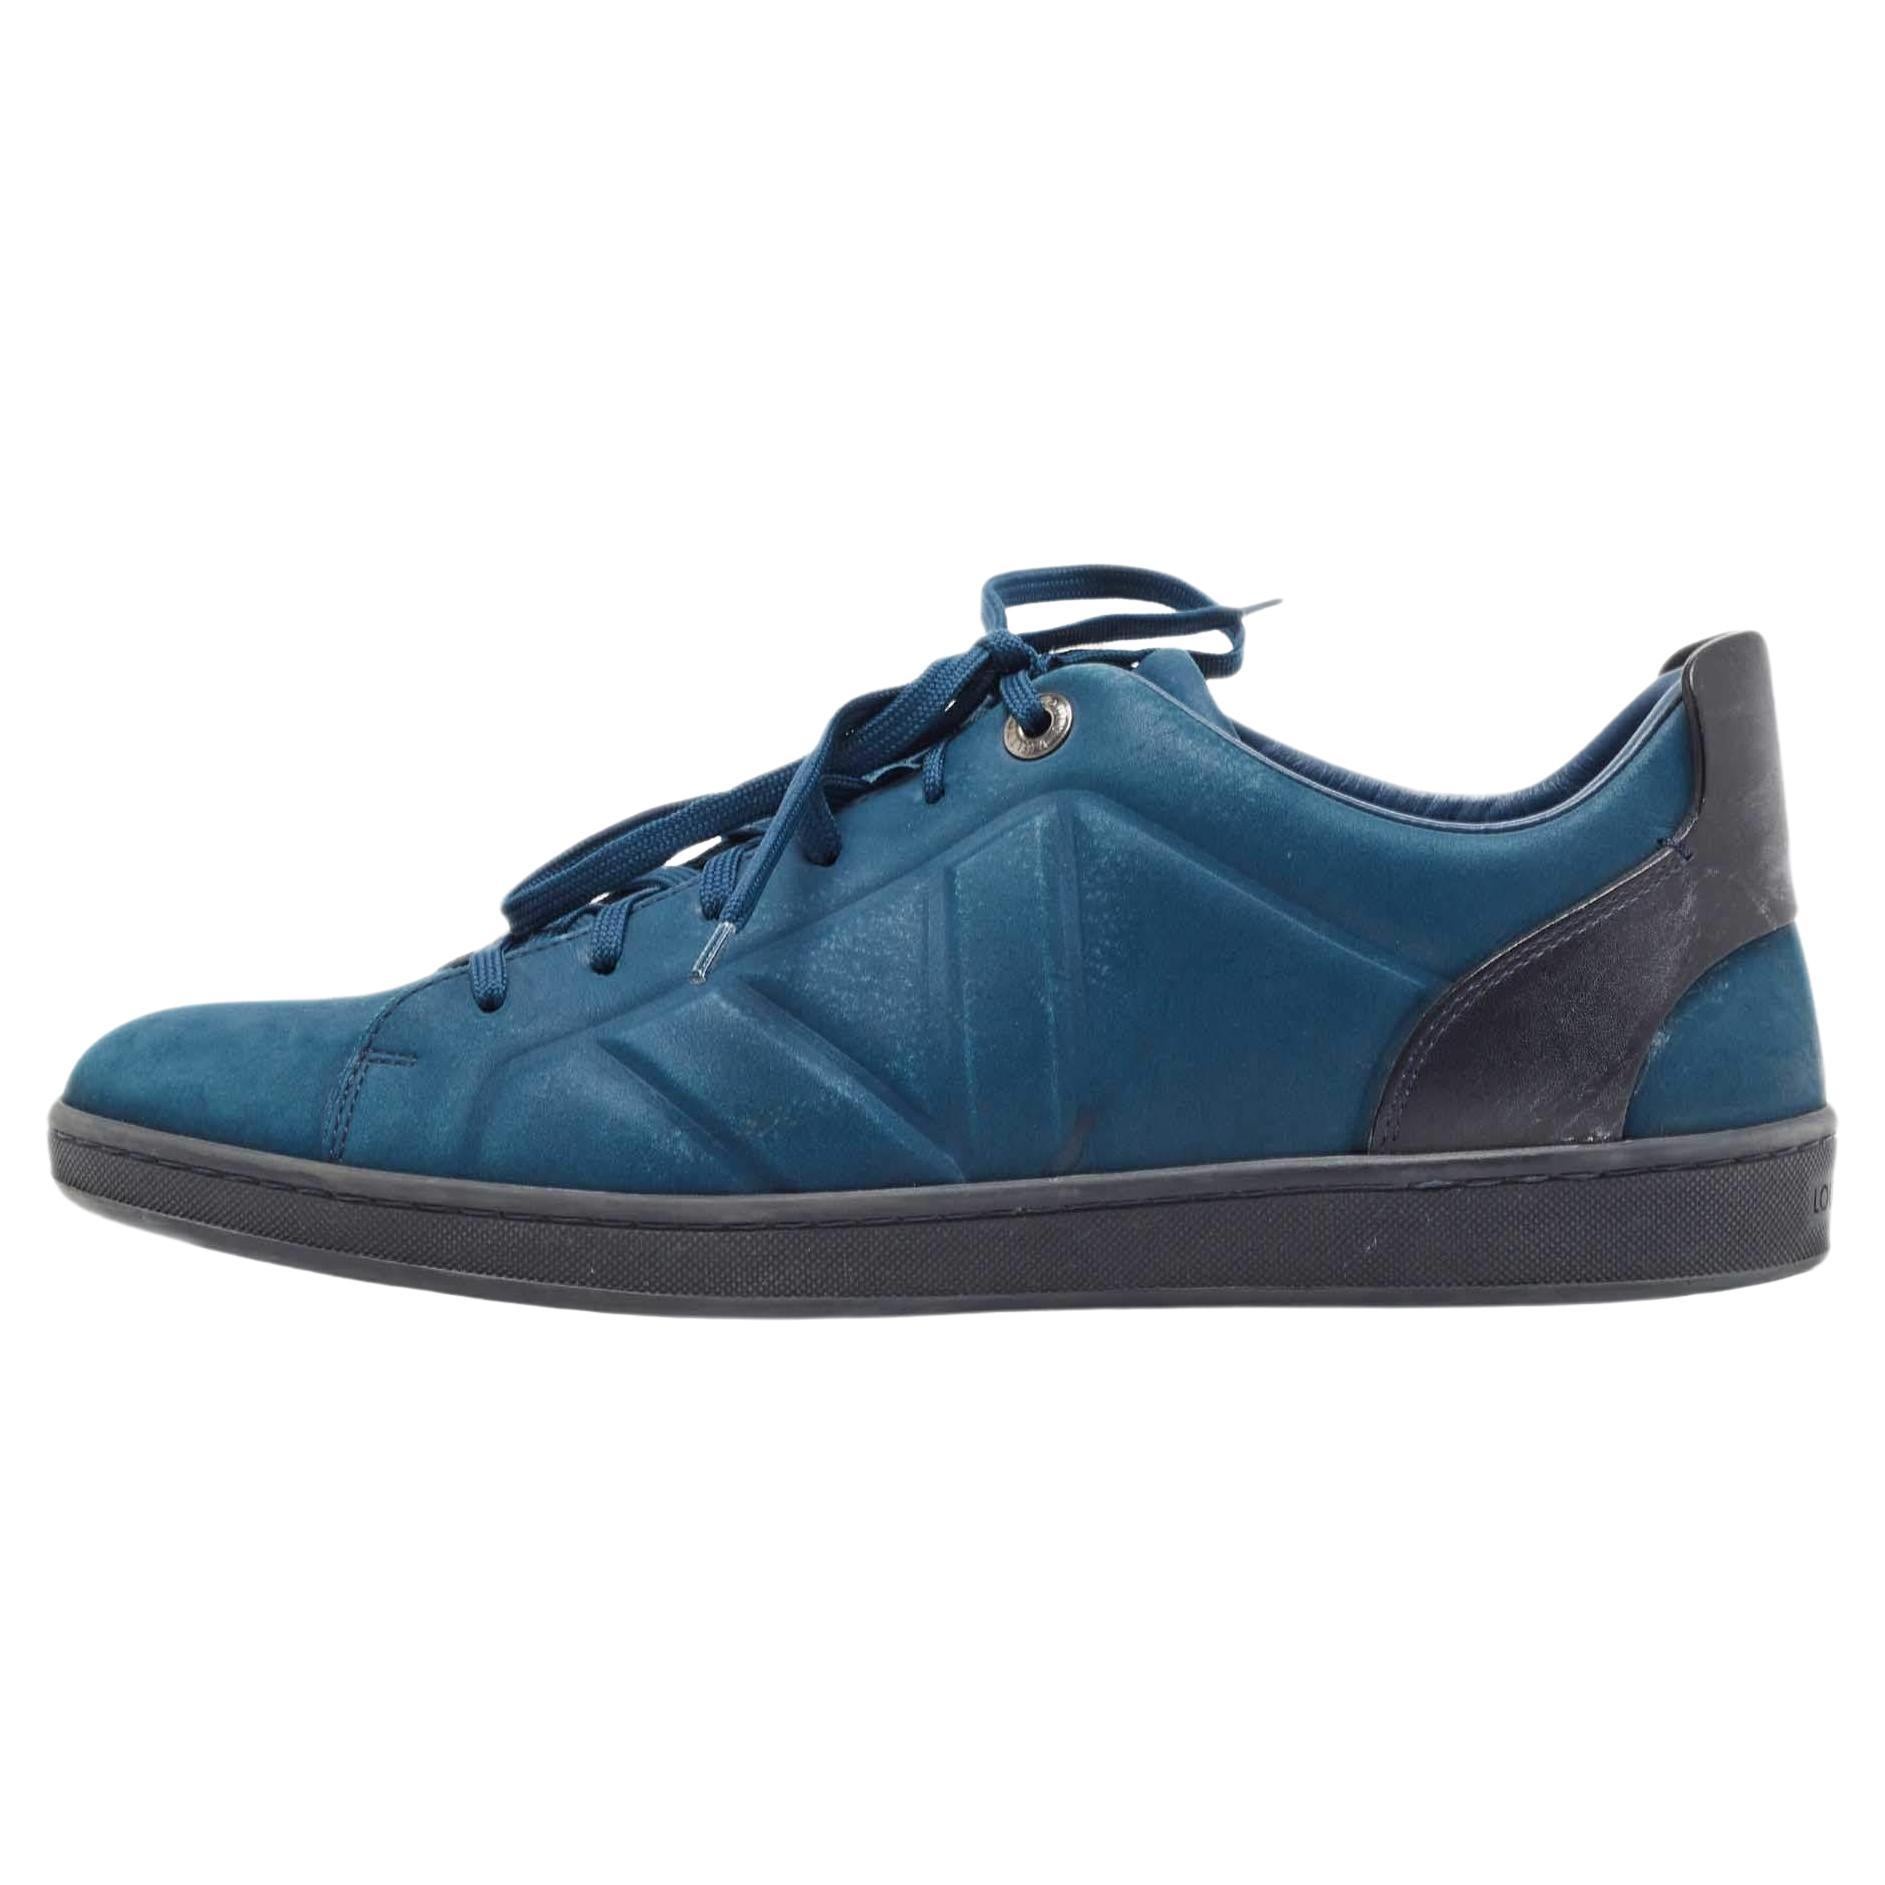 Louis Vuitton Blue Nubuck Leather Fuselage Low Top Sneakers Size 43 For Sale